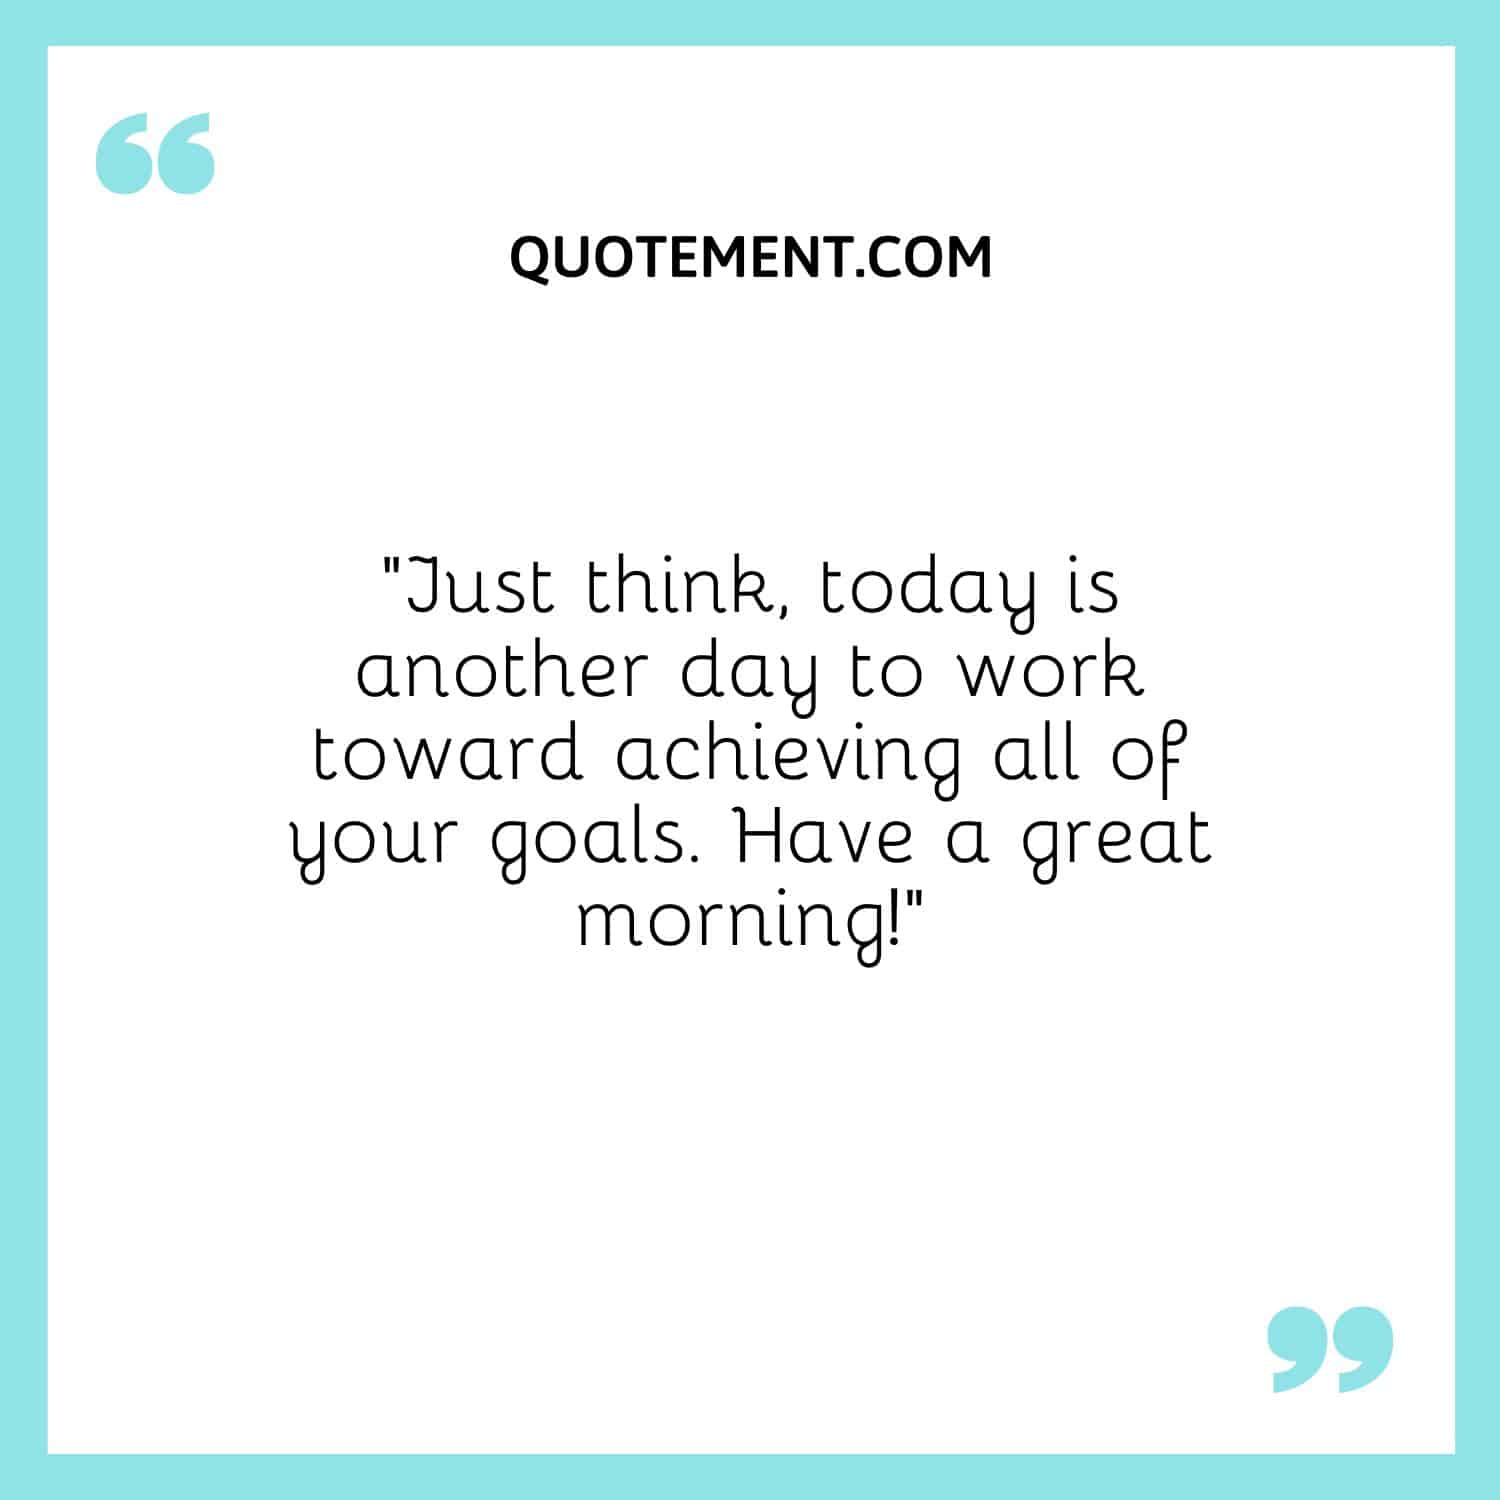 today is another day to work toward achieving all of your goals.